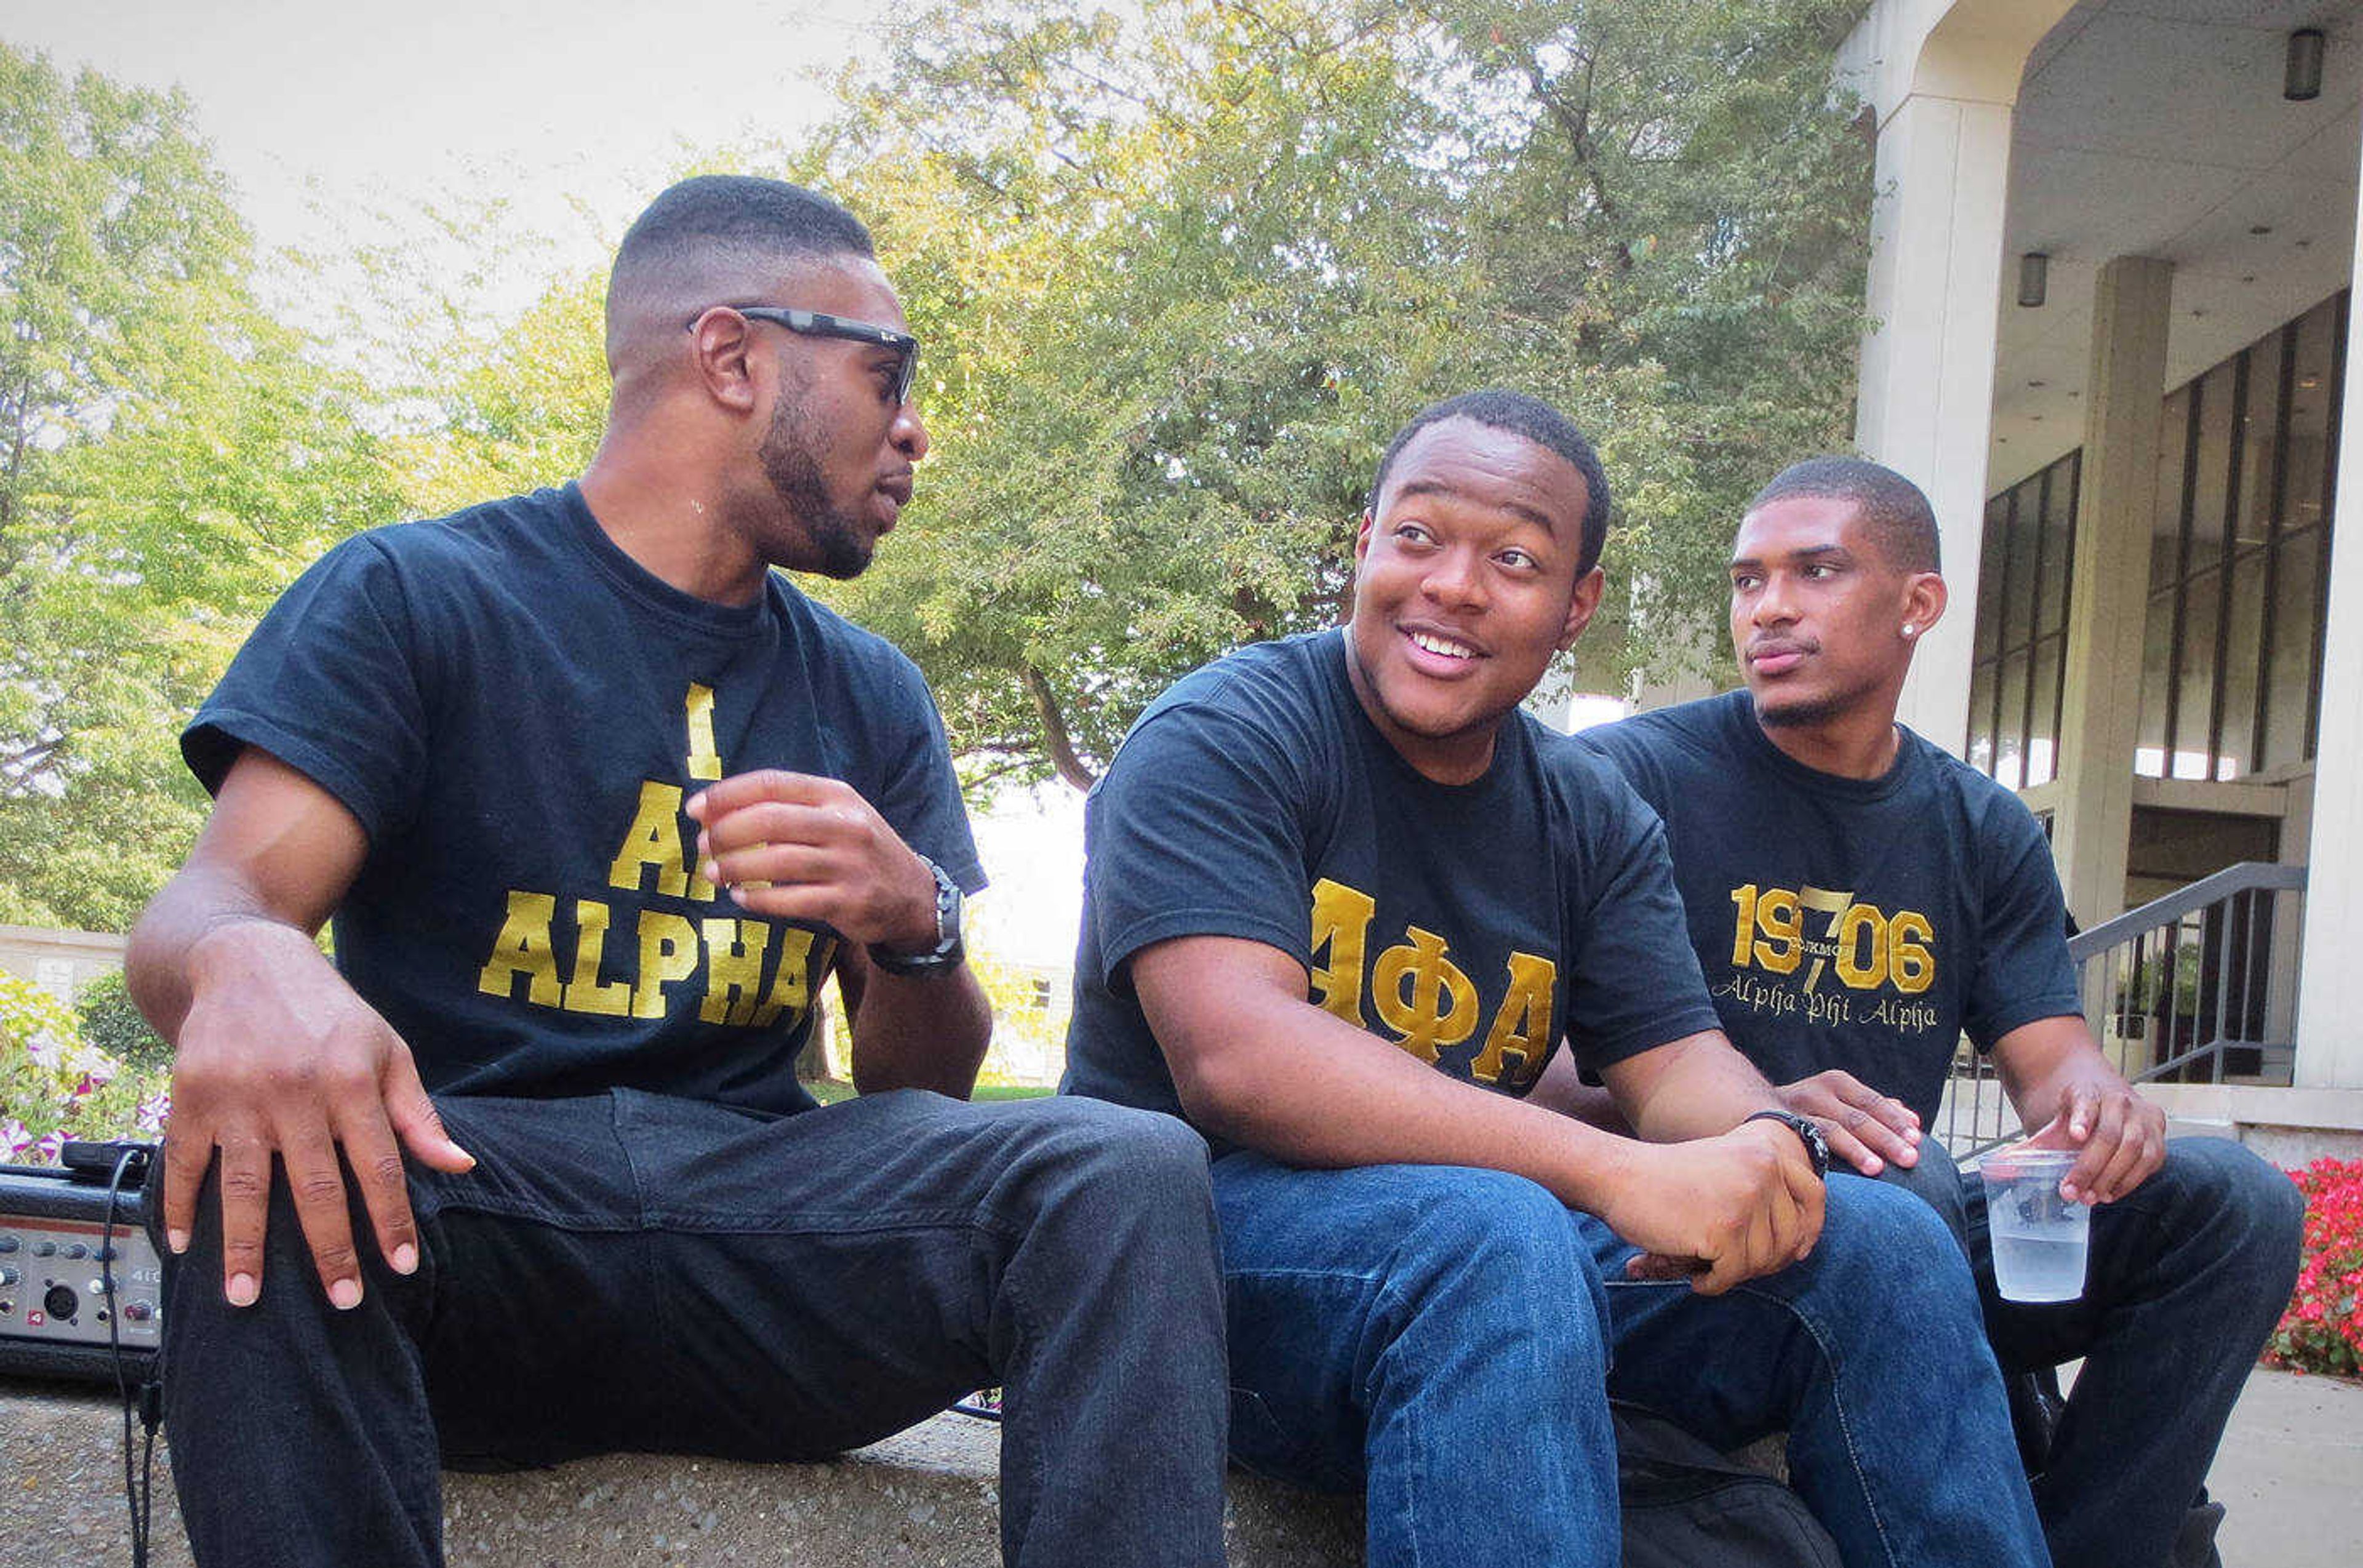  Alpha Phi Alpha members Joe Hill, Martez Byrth and Jeremiah Hathore hang out and listen to music.  Photo by Kirsten Trambley